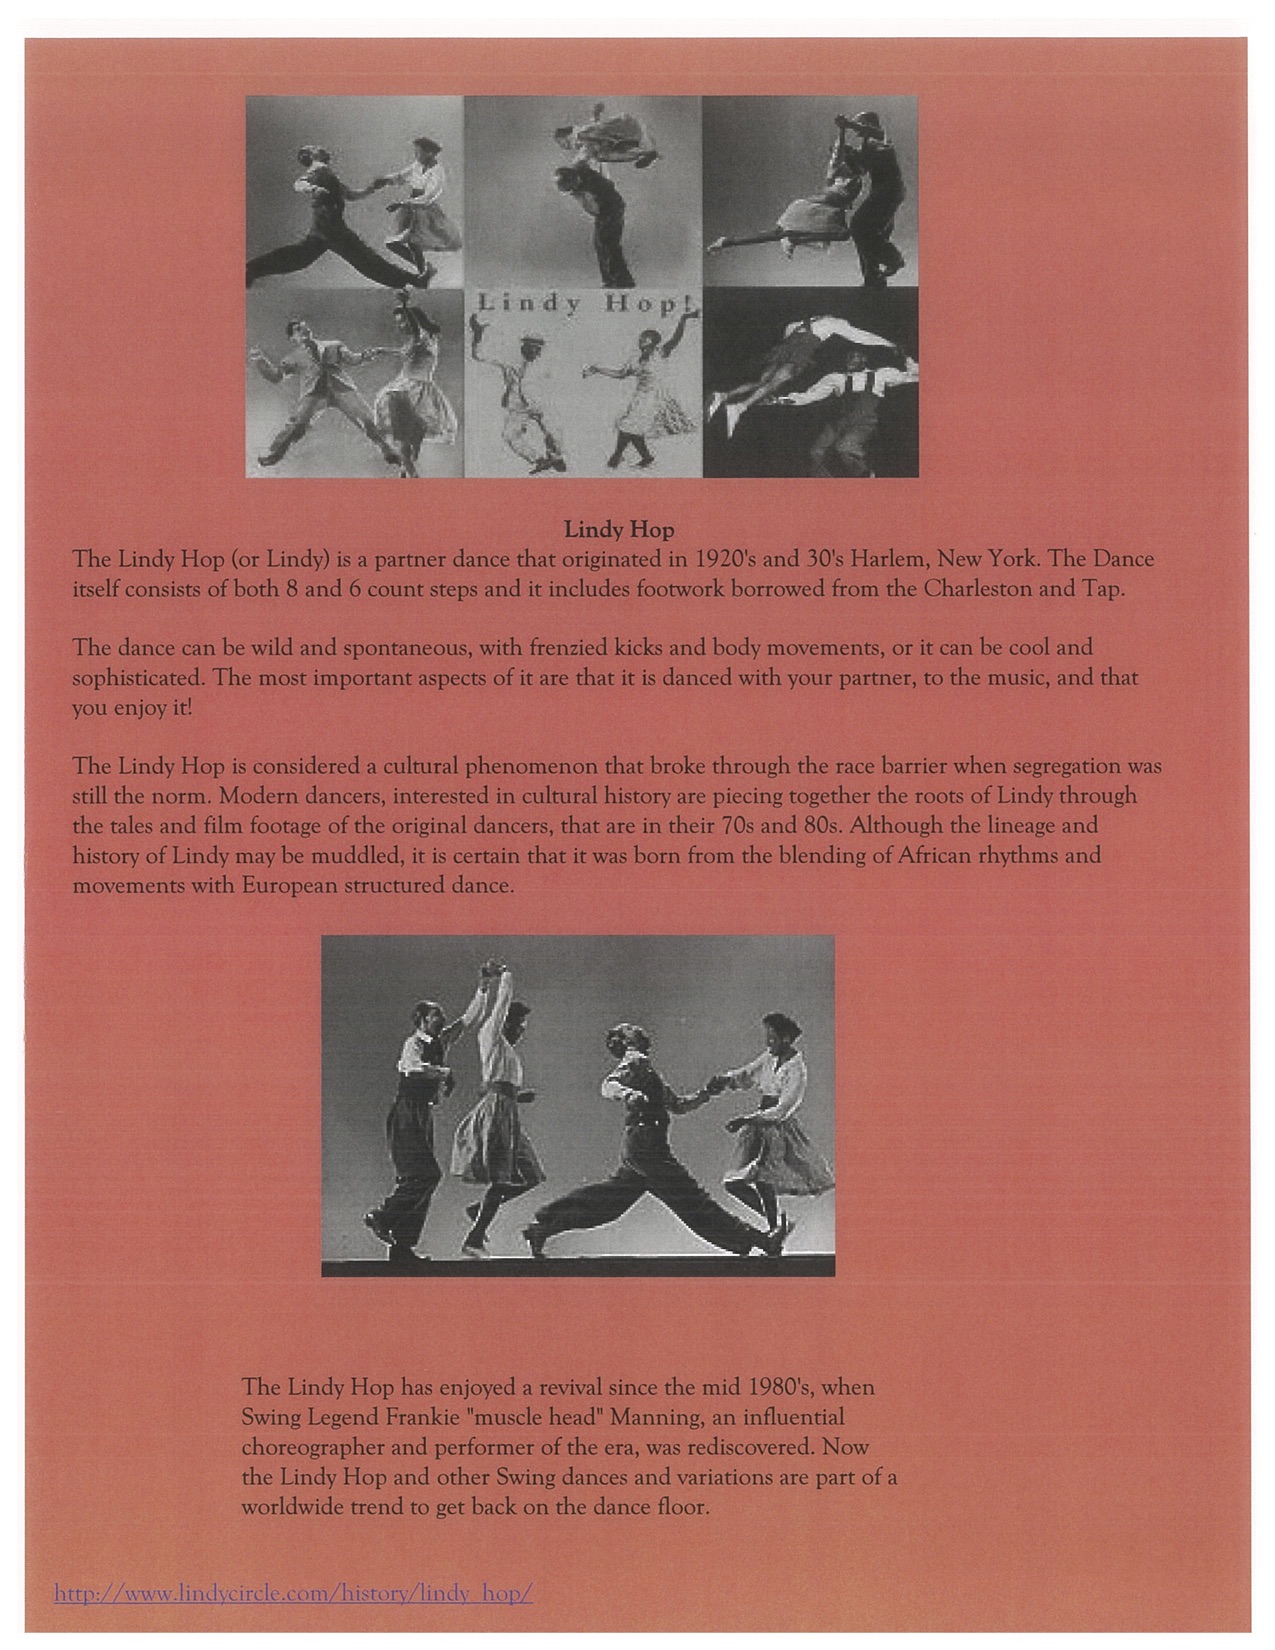 Page 6. The Lindy Hop with two images of people dancing.